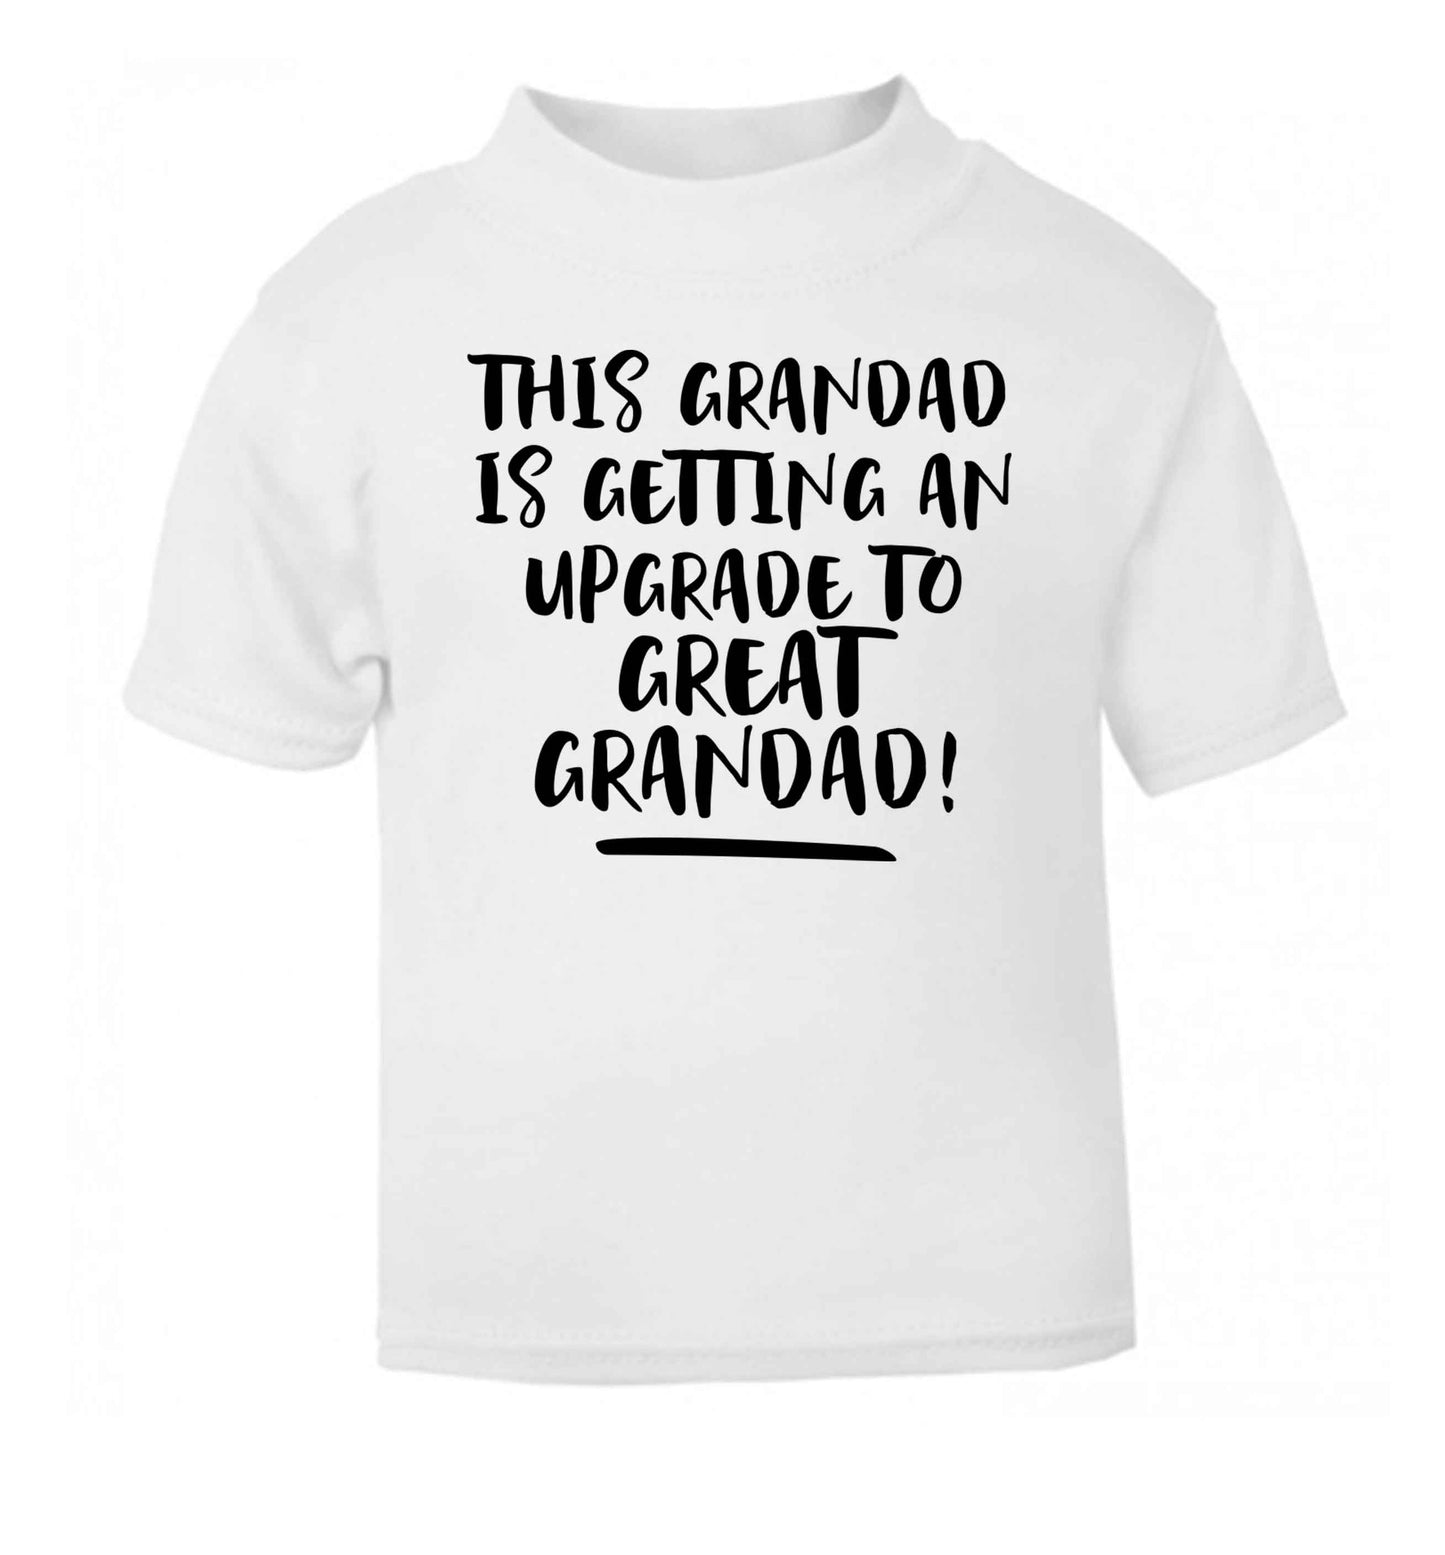 This grandad is getting an upgrade to great grandad! white Baby Toddler Tshirt 2 Years